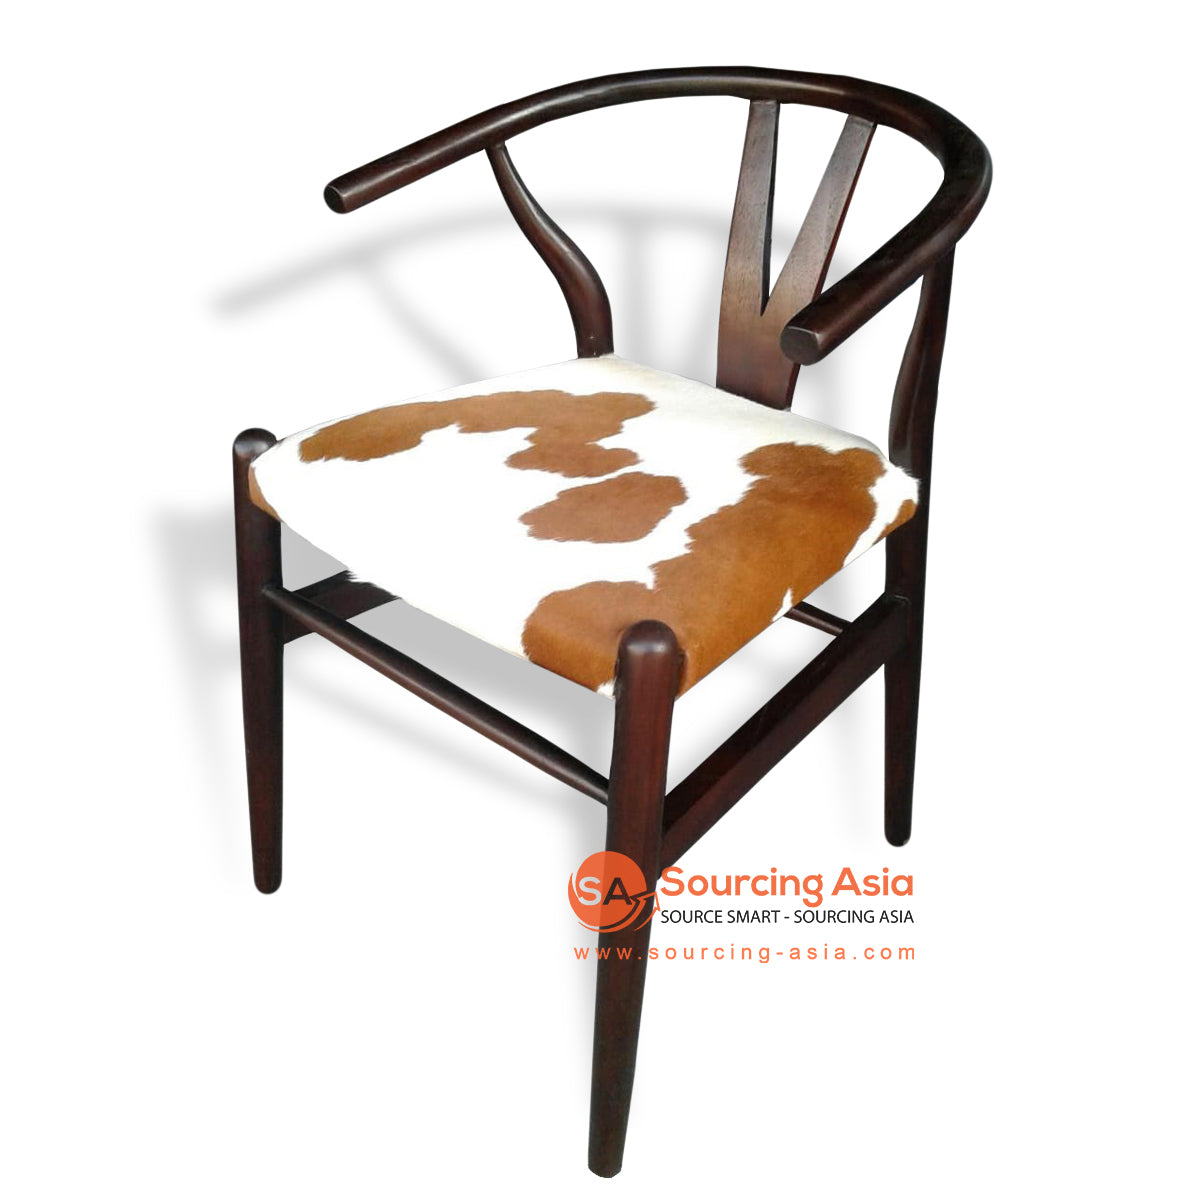 KUSJ072-1 BROWN AND WHITE WOVEN LEATHER AND NATURAL TEAK WOOD WISHBONE DINING CHAIR